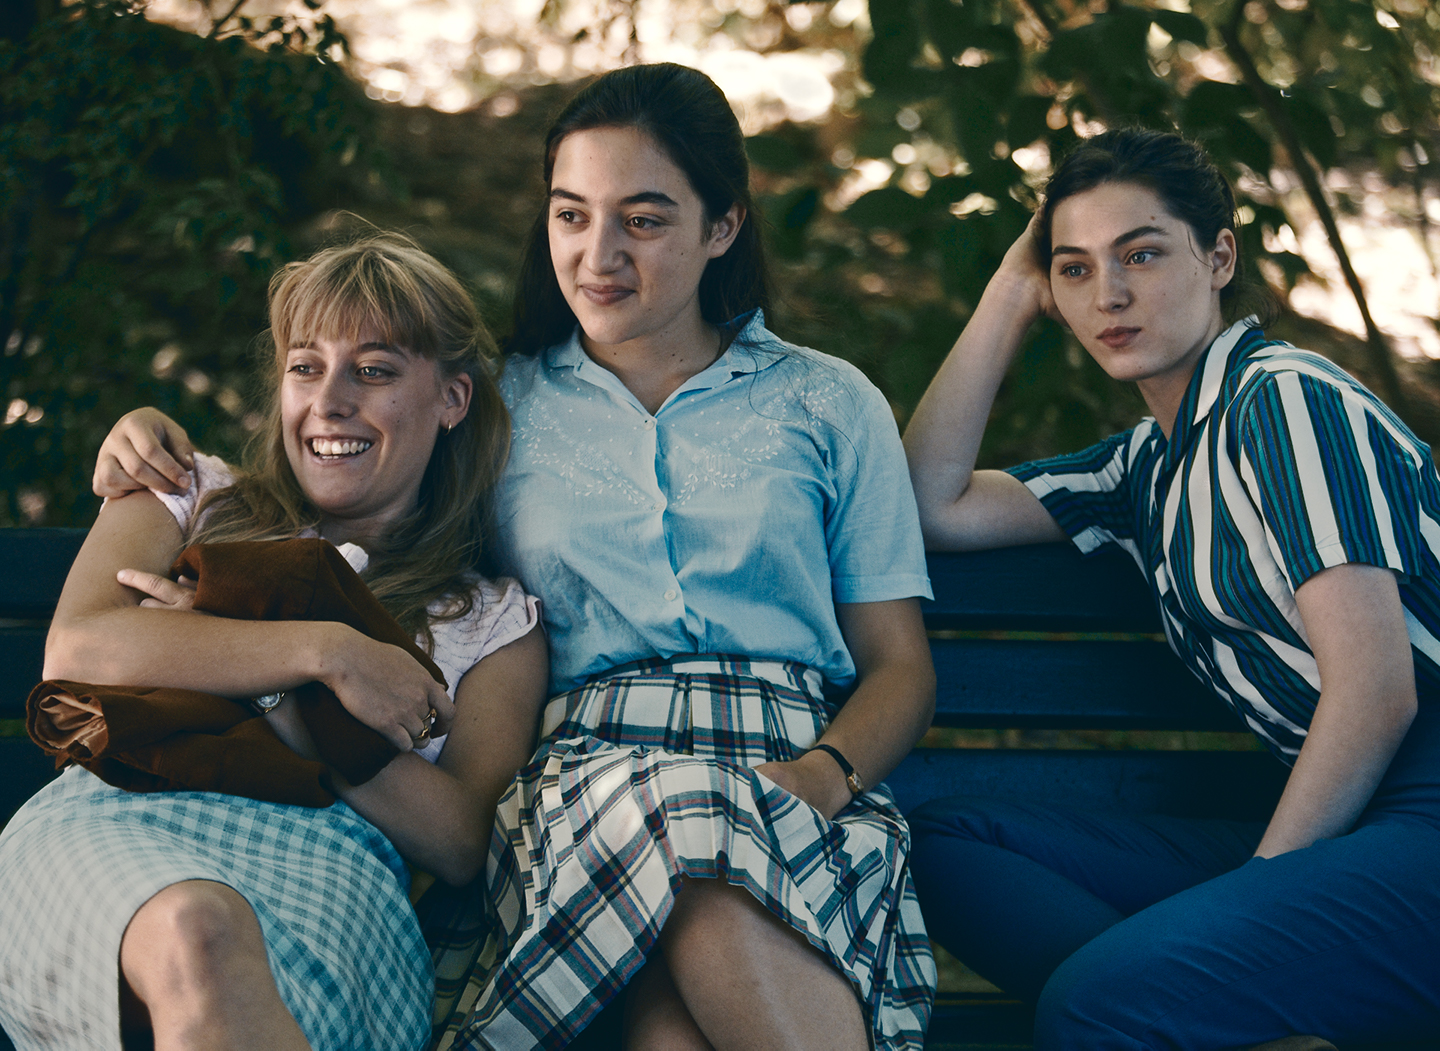 Three young women sit close to each other on a bench